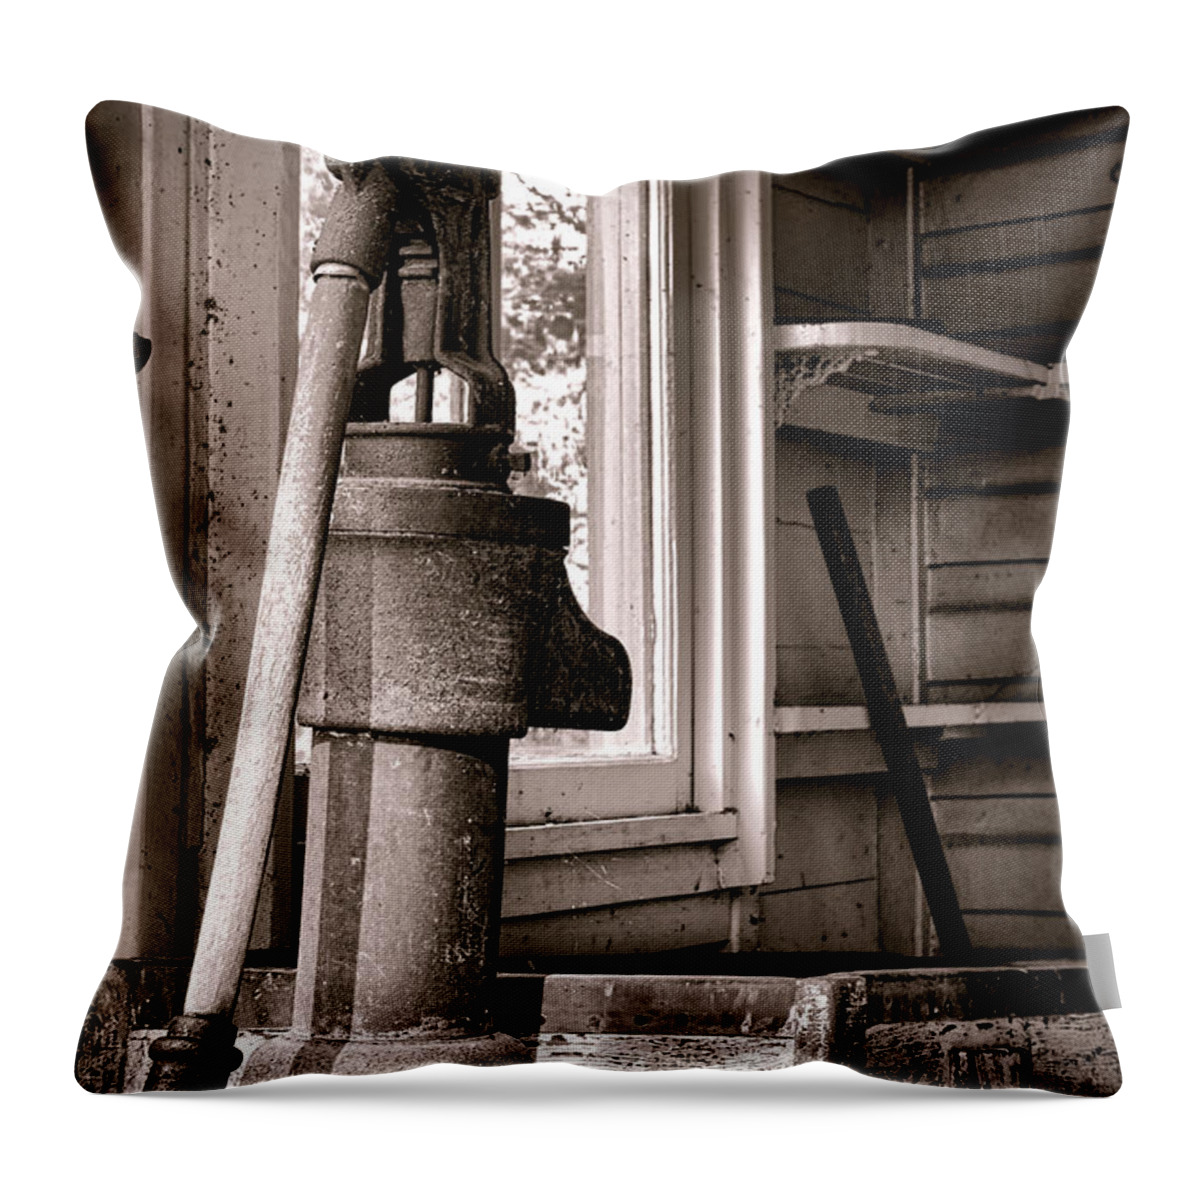 Water Throw Pillow featuring the photograph Indoor Plumbing by Olivier Le Queinec